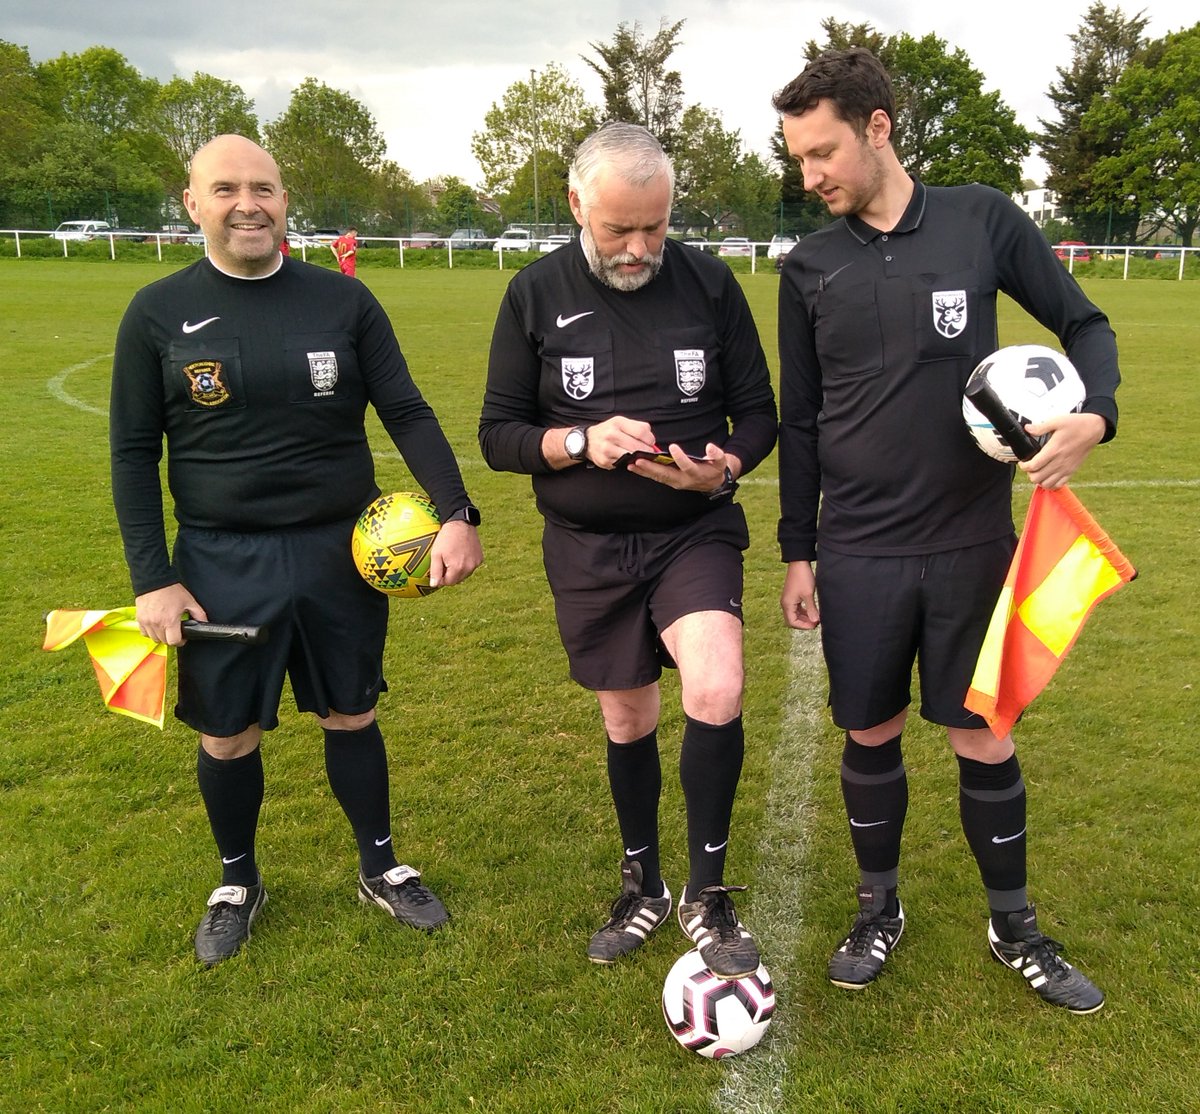 The match officials did a good job last night. You can't have a football match without officials!

@ref_grassroots @TheRefereeForum @NonLeagueCrowd @refsix @refsupportuk @TheRefereeStore @FARefereeing @Teamgrassroots_ @jamesdearl @HertfordshireFA @RefereesWorld @no1capone